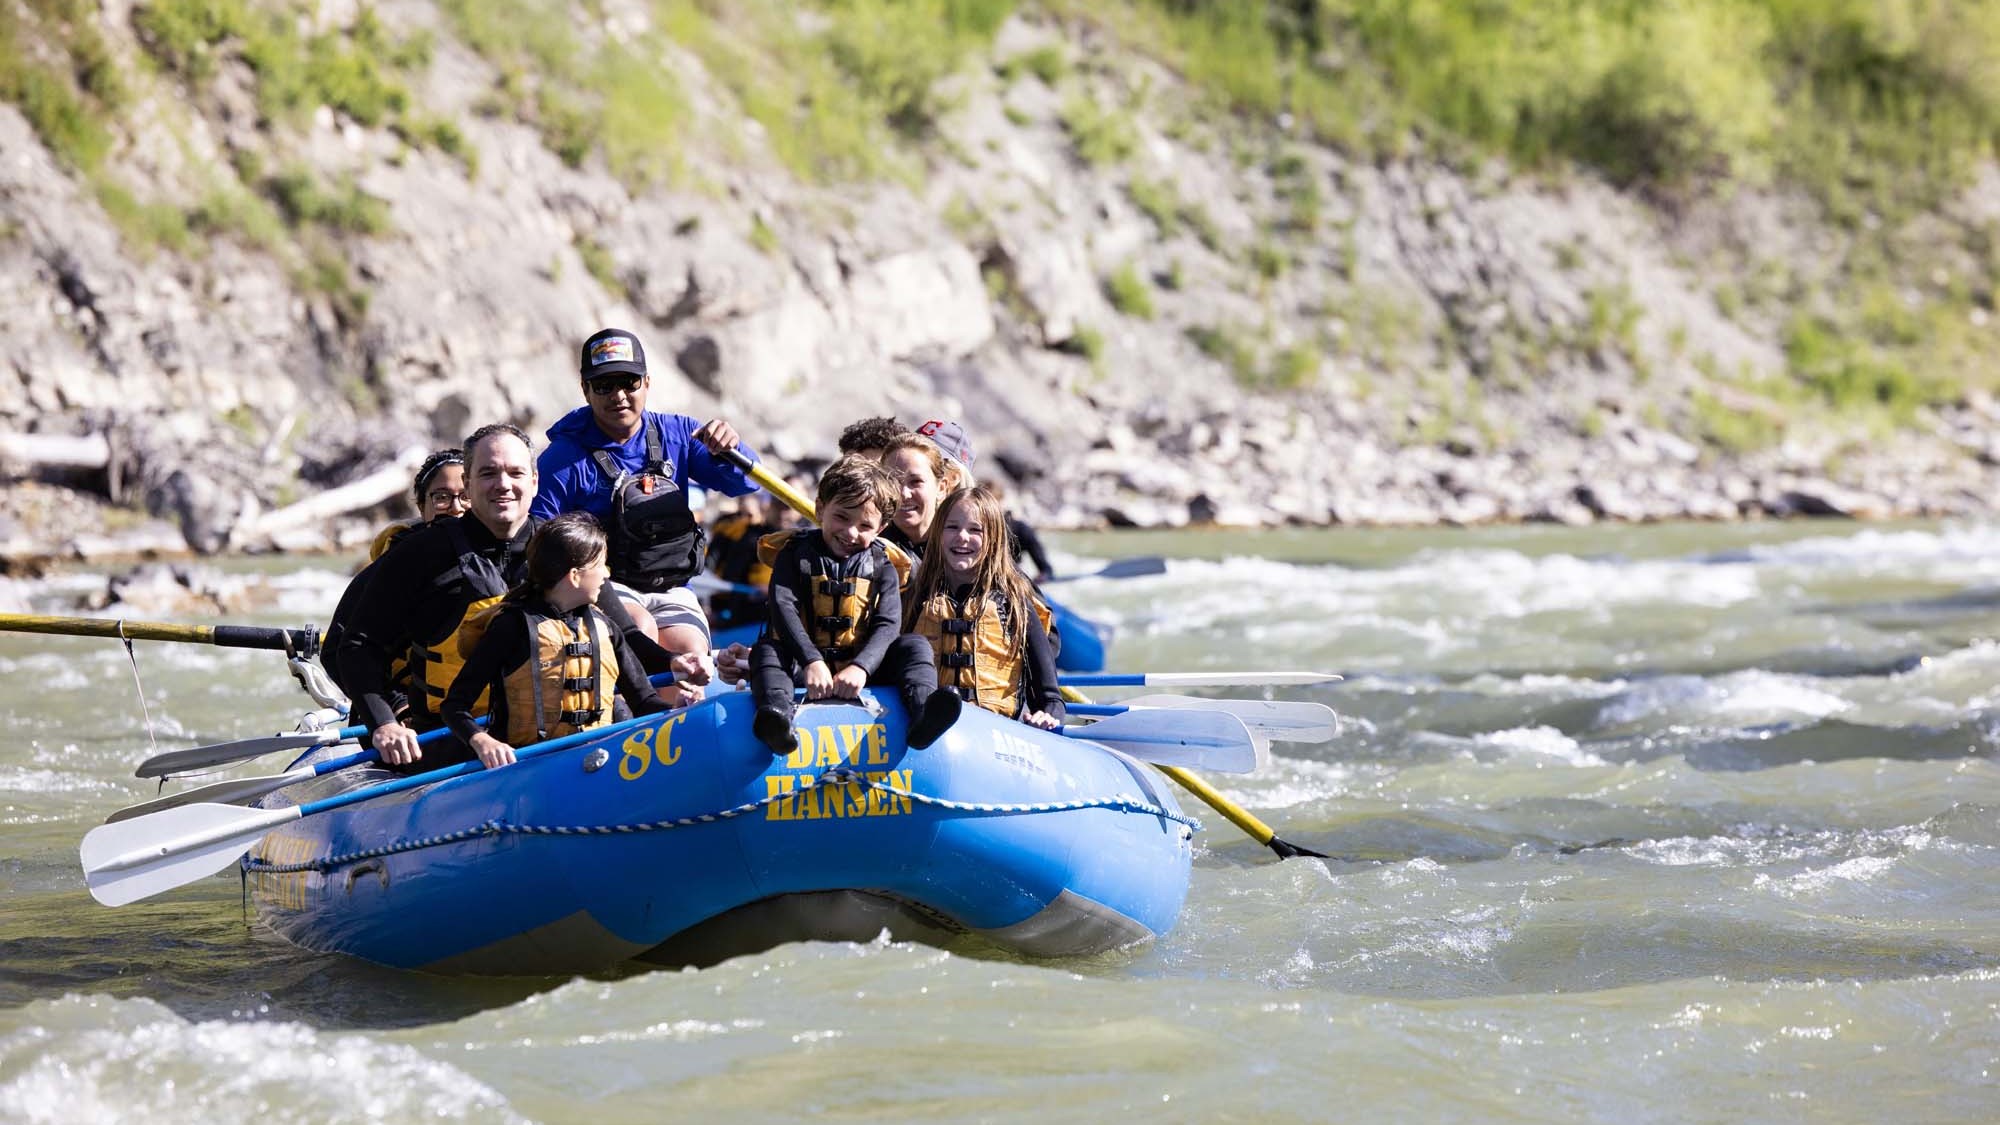 A young boy rides on the front of a blue Dave Hansen Whitewater raft while floating down the Snake River.